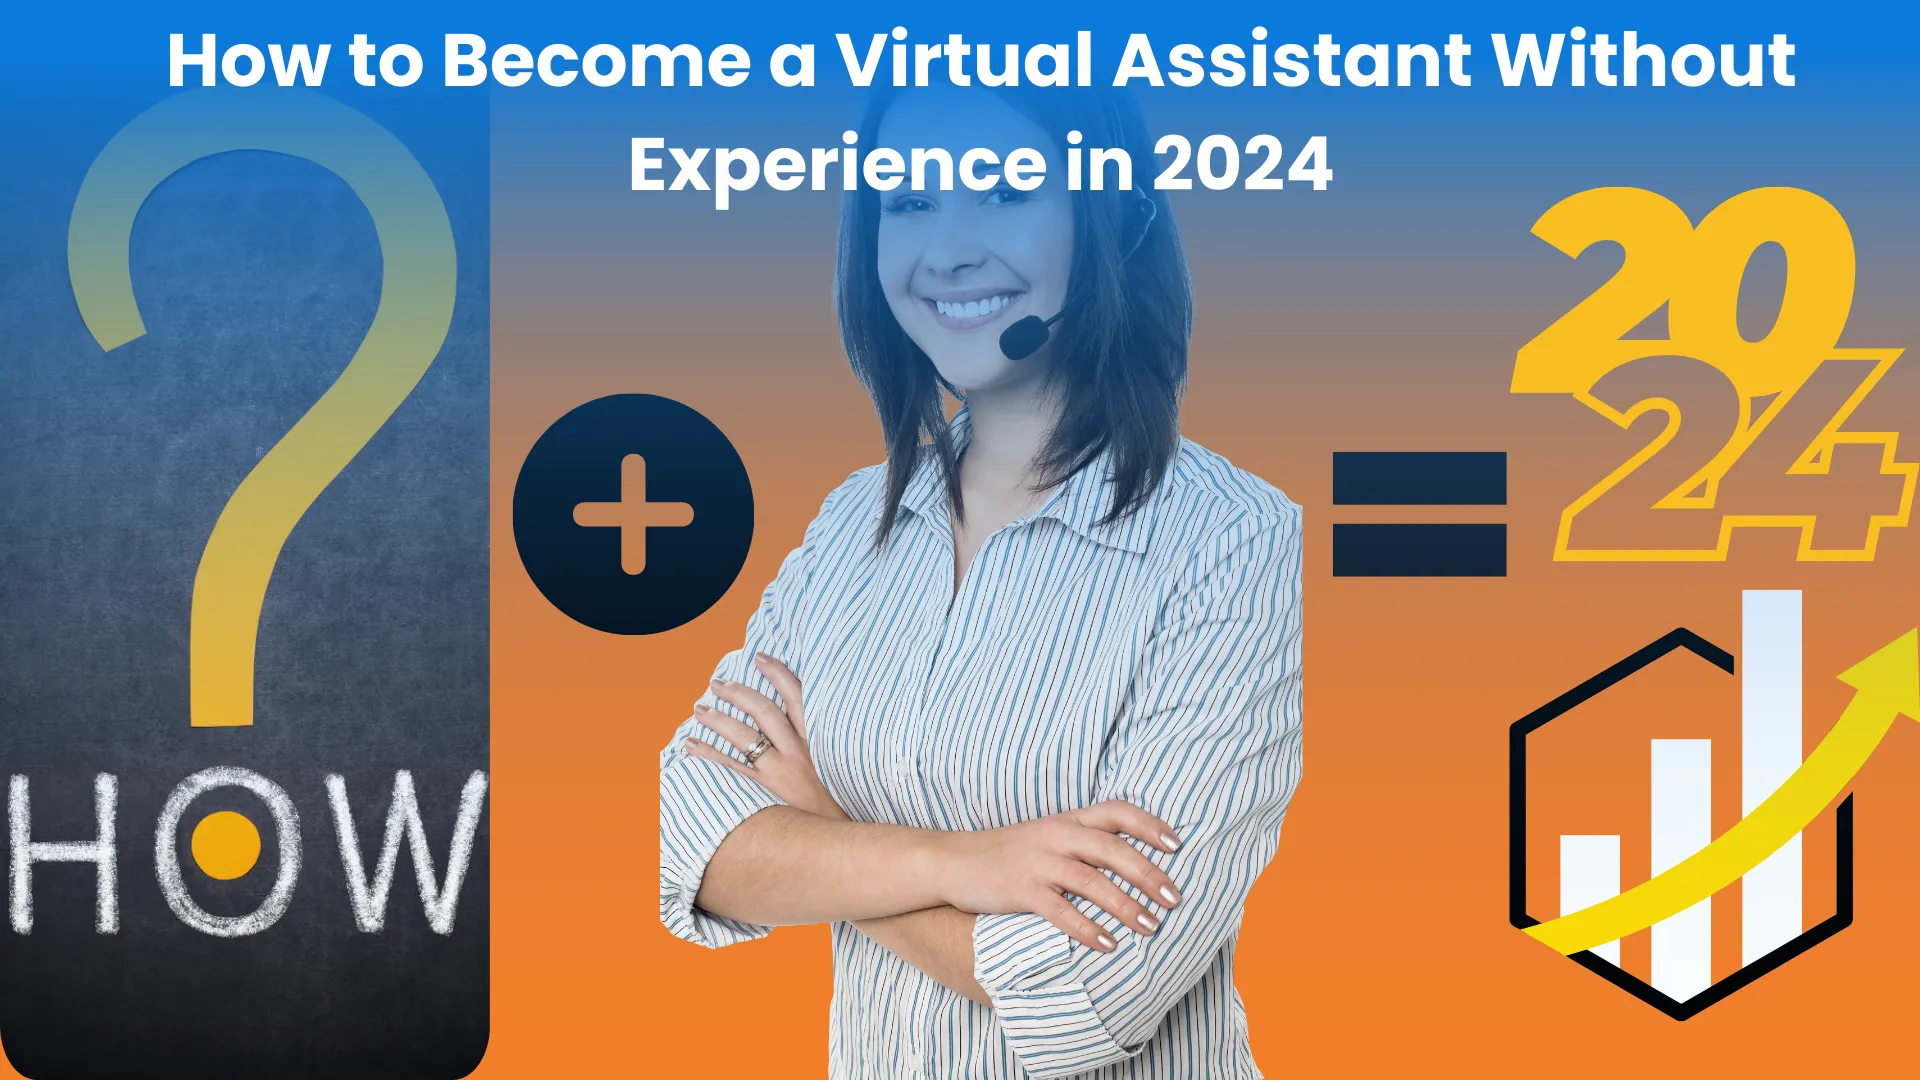 How to Become a Virtual Assistant Without Experience in 2024